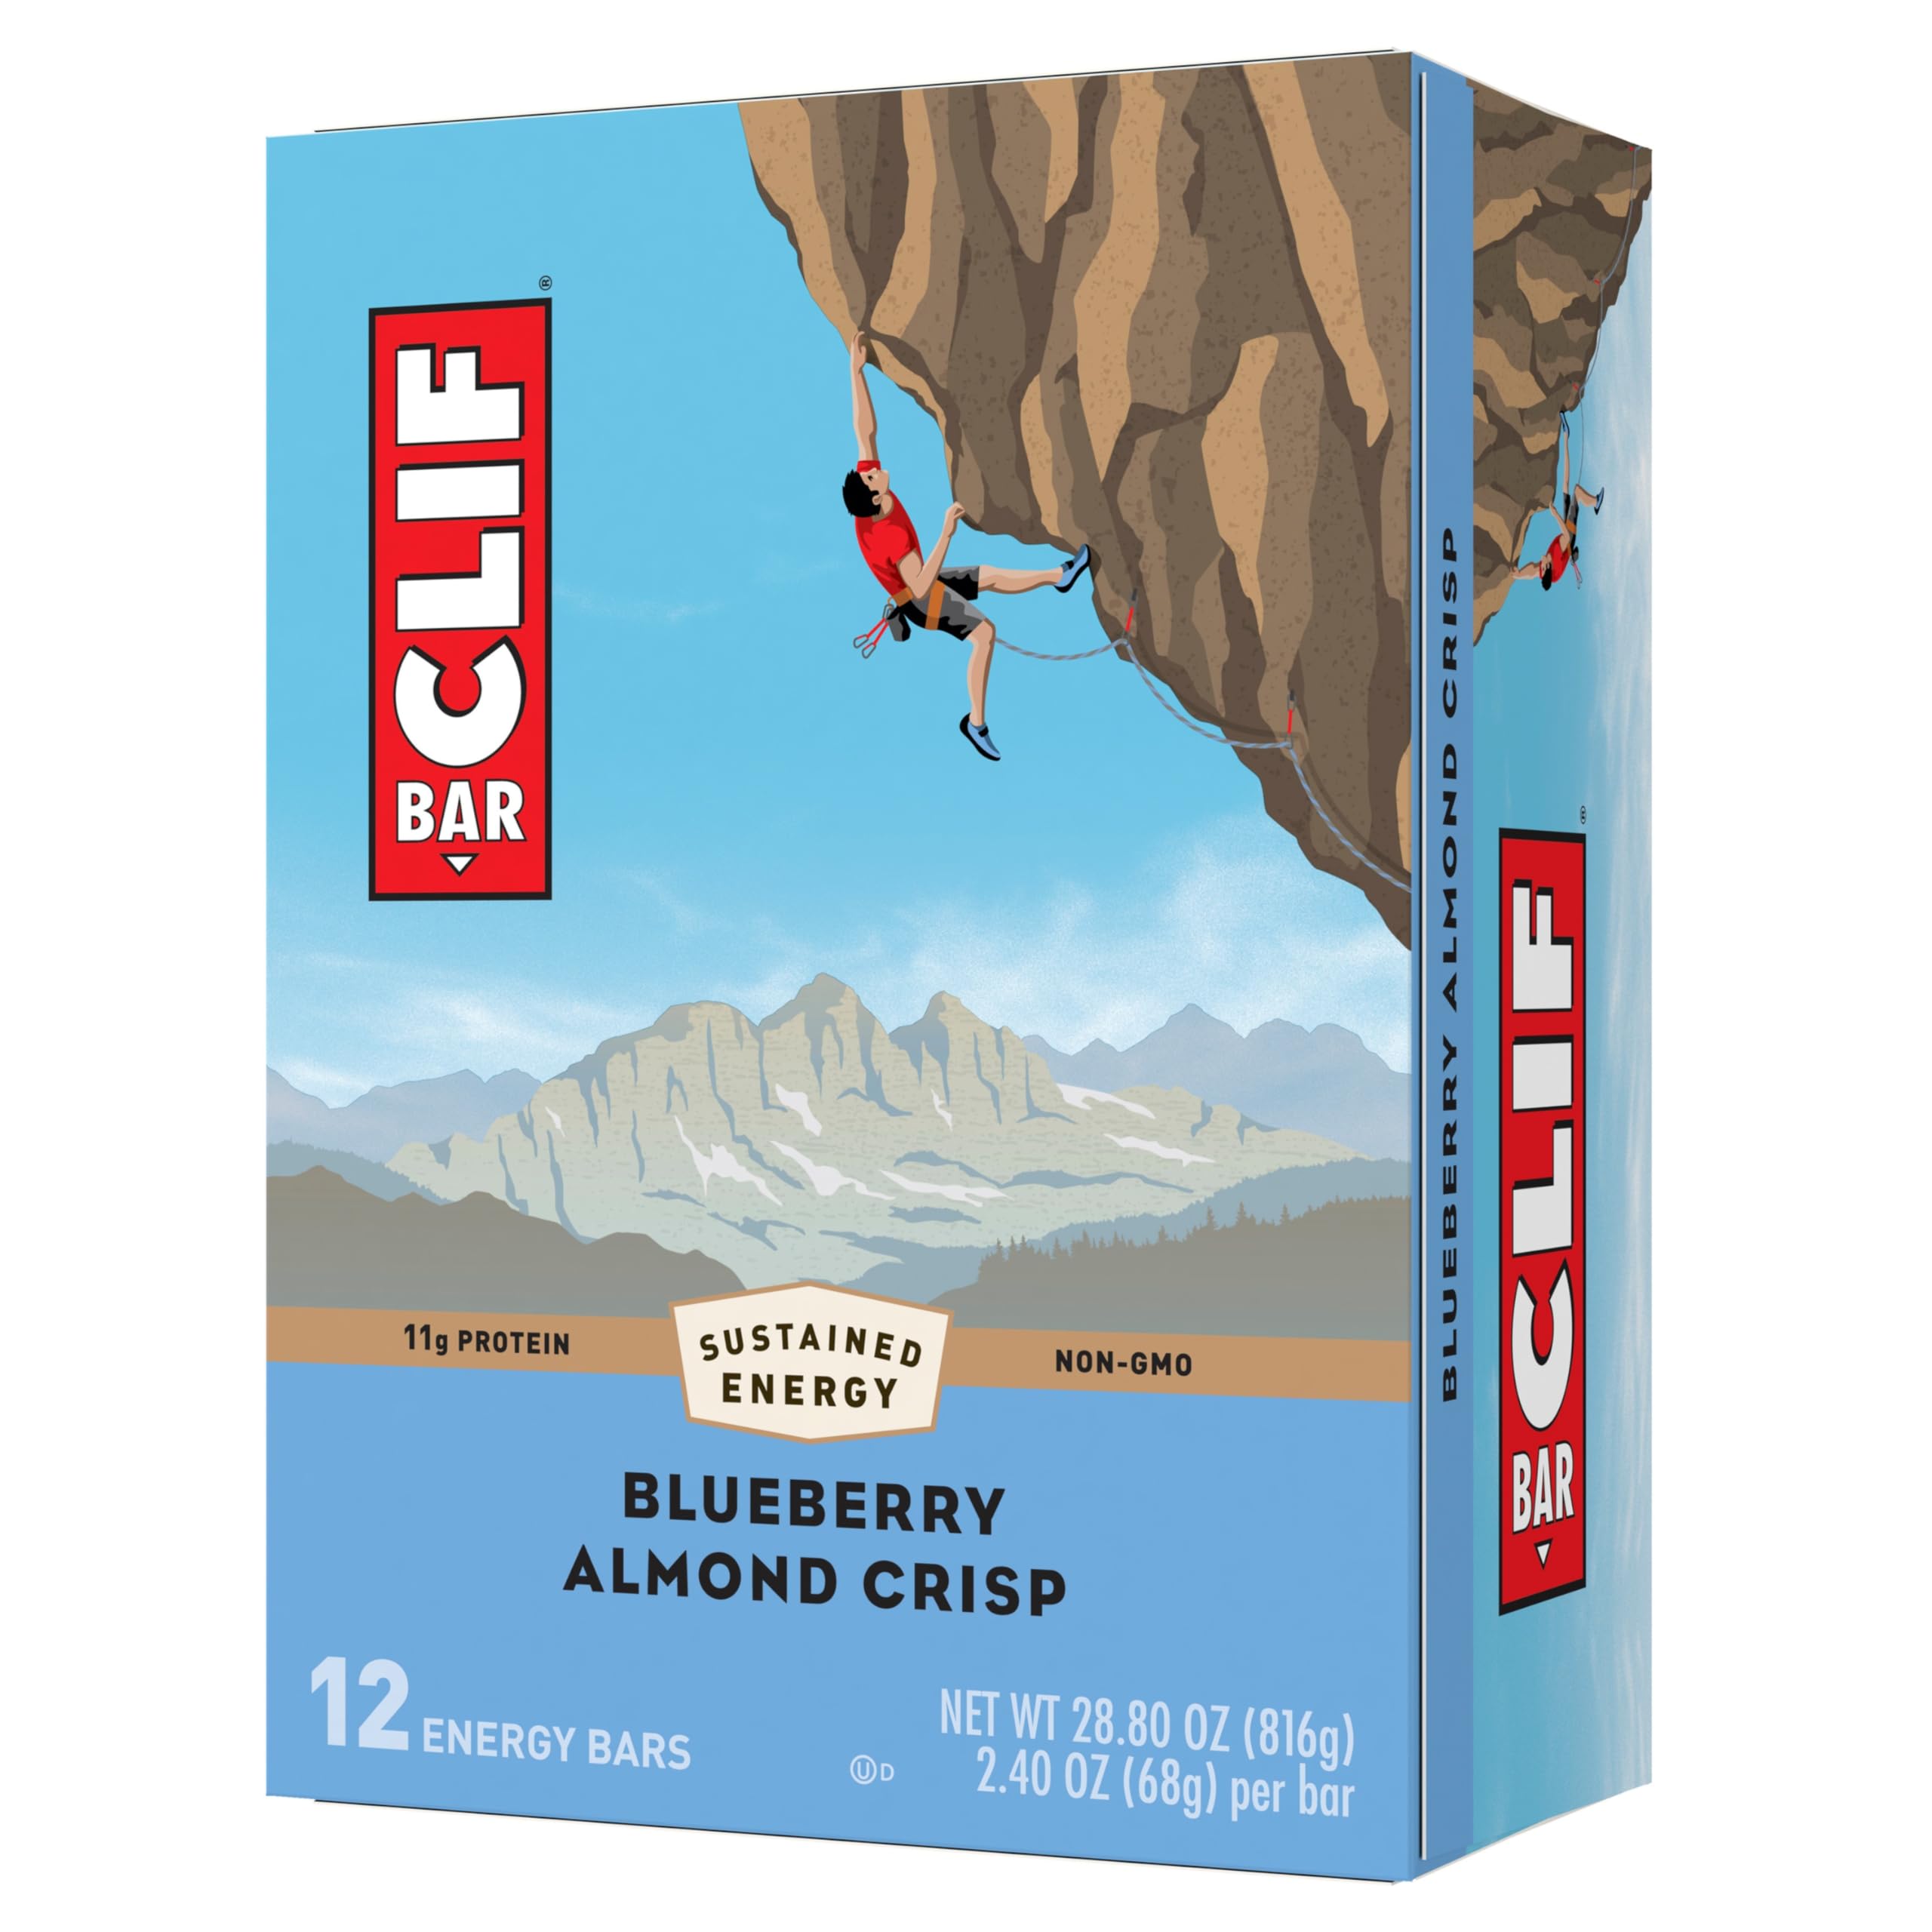 CLIF BAR - Peanut Butter Banana with Dark Chocolate Flavor & - Blueberry Almond Crisp - Made with Organic Oats - Non-GMO - Plant Based - Energy Bars - 2.4 oz. (12 Pack)